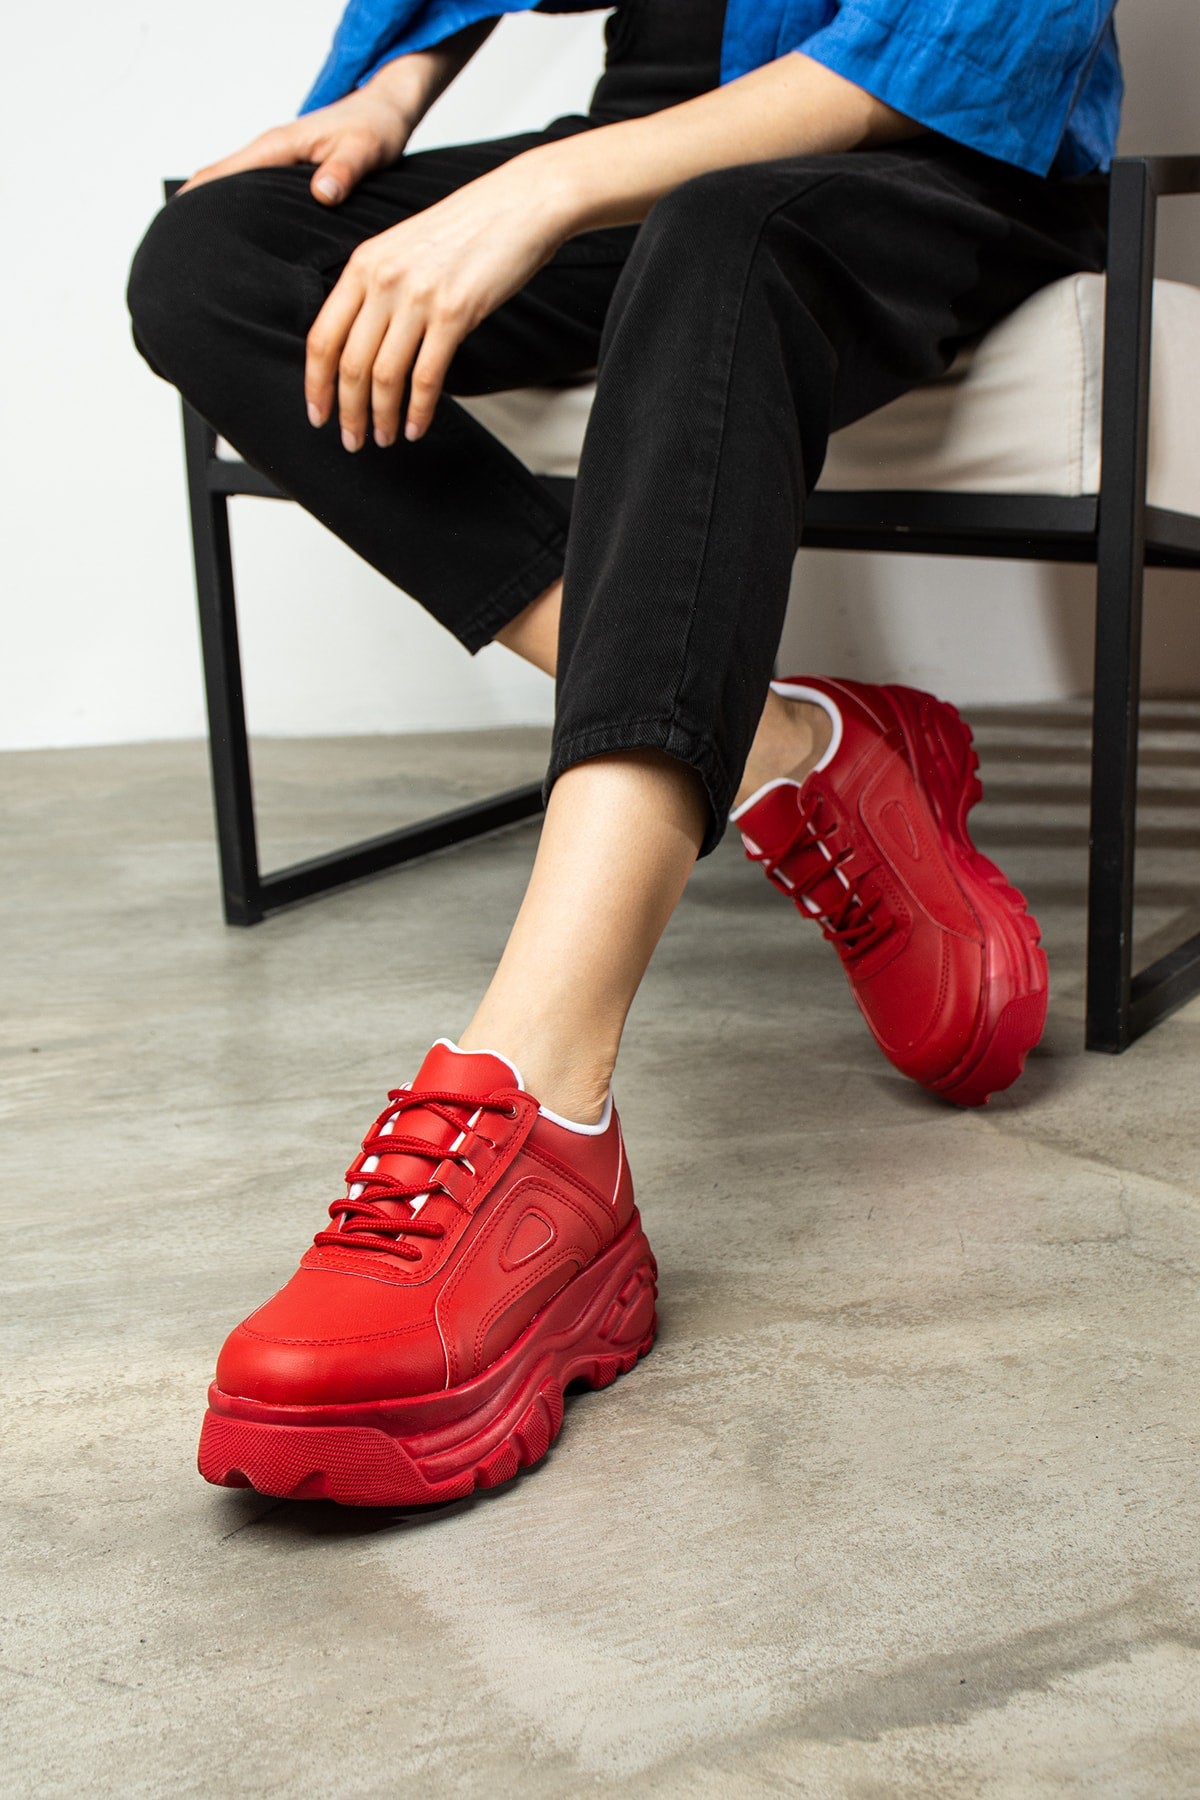 Daily Women Red Sneaker Sneake Patterned Light High Base Lace 001